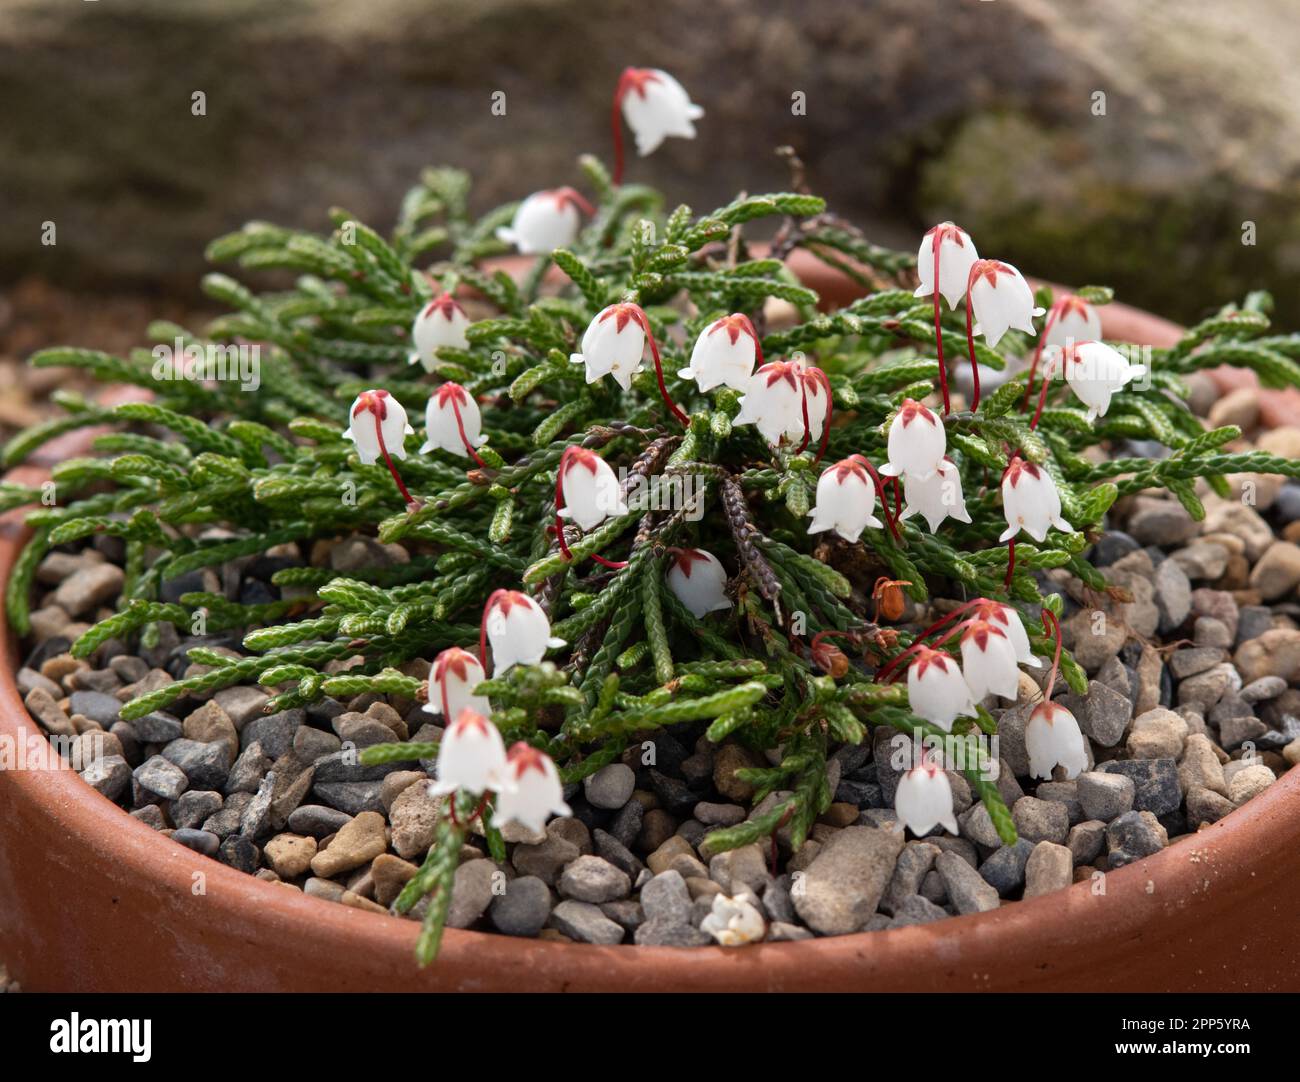 Cassiope lycopodioides 'Beatrice Lilley' Stock Photo